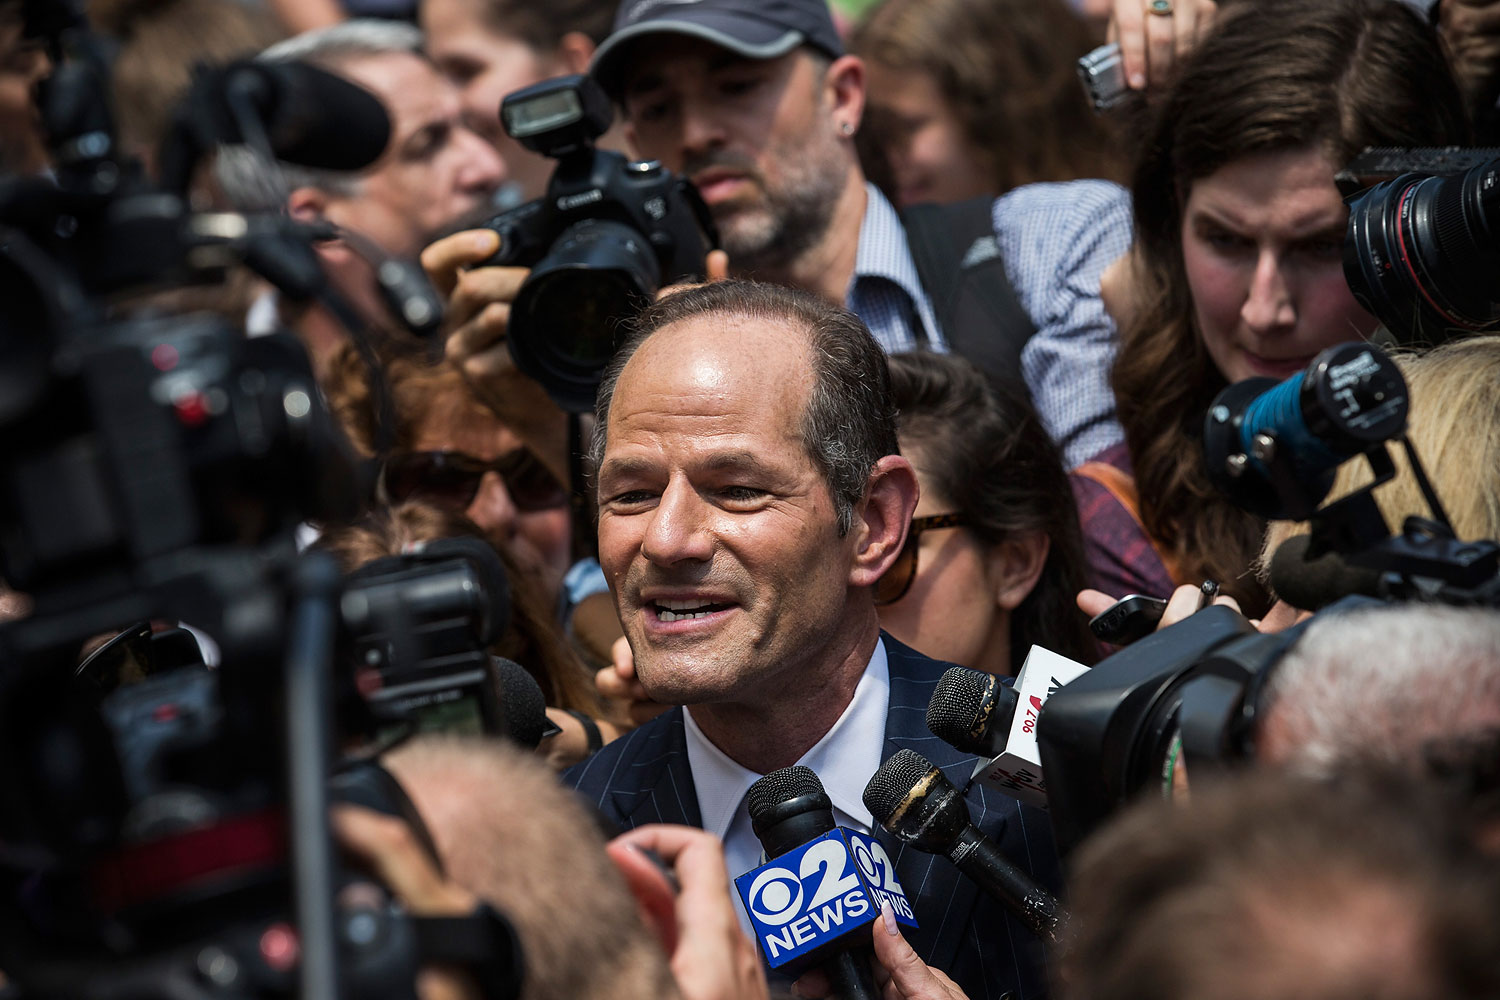 Former New York Gov. Eliot Spitzer is mobbed by reporters while attempting to collect signatures to run for comptroller of New York City on July 8, 2013 in New York City.